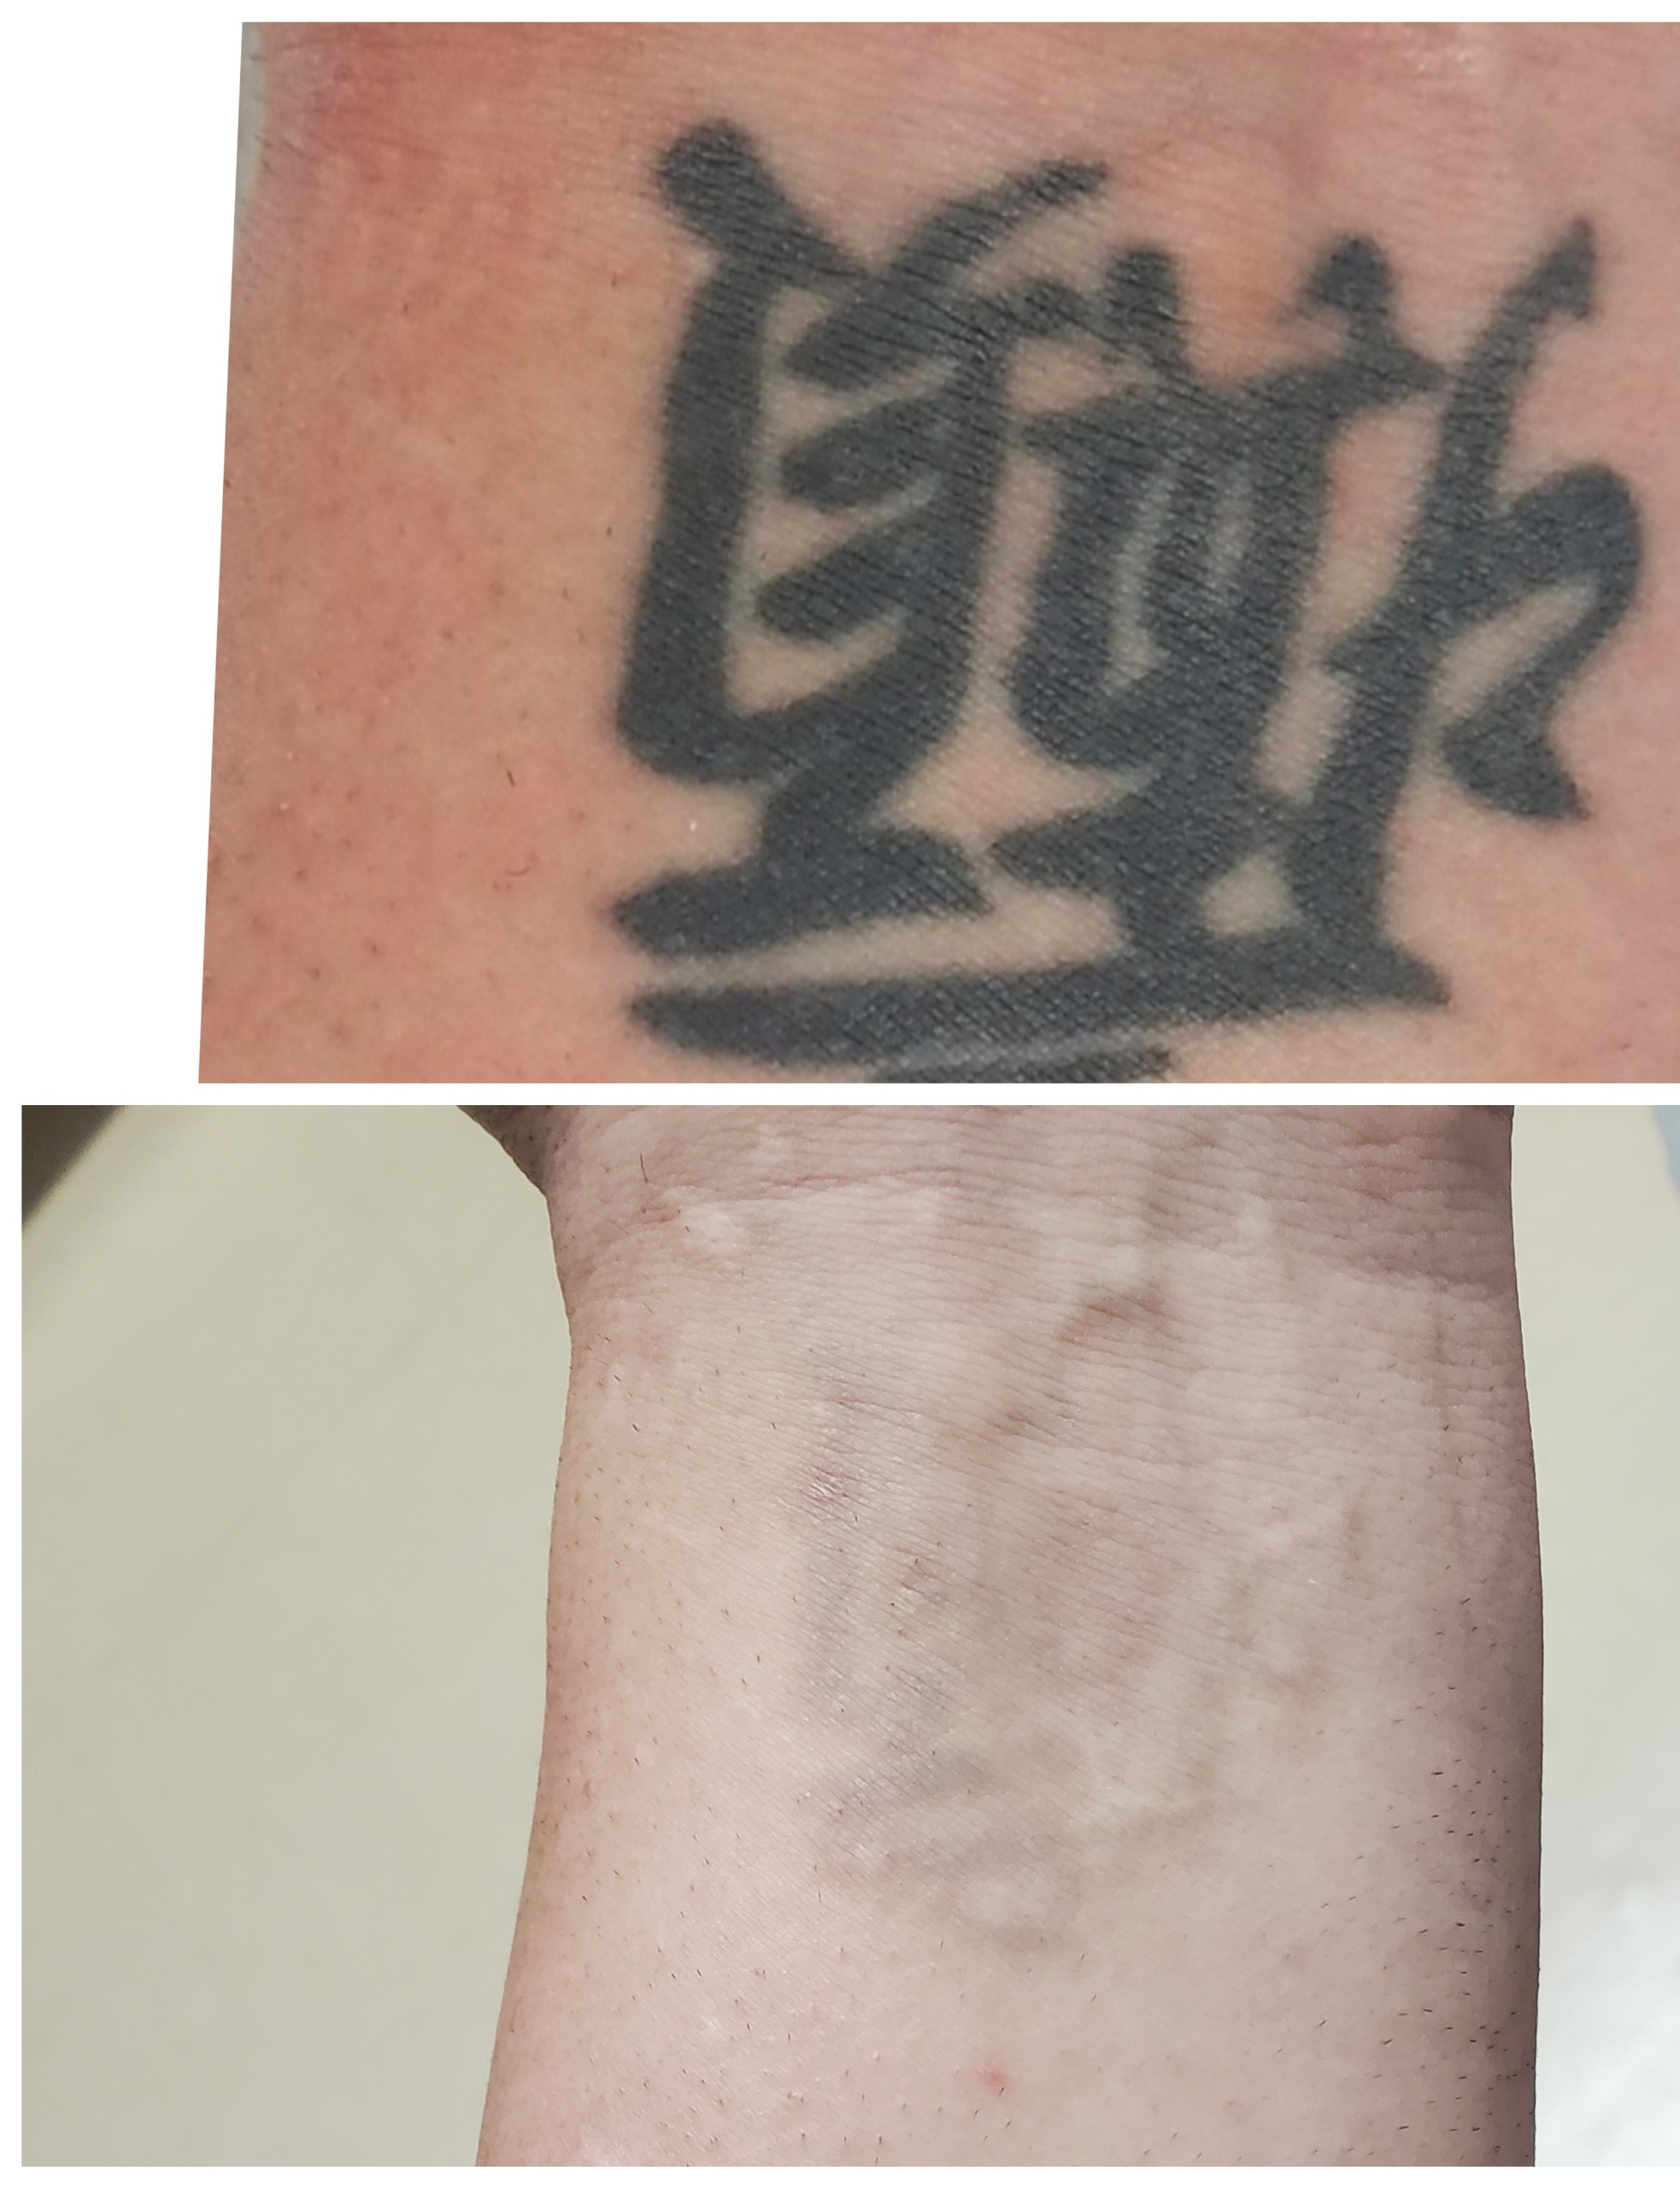 Tattoo removal Laser removal of tattoos lasers to remove your tattoo at  Advanced Dermatology Pocono Medical Care serving PA NJ and NY Milford  Pennsylvania Richard E Buckley MD